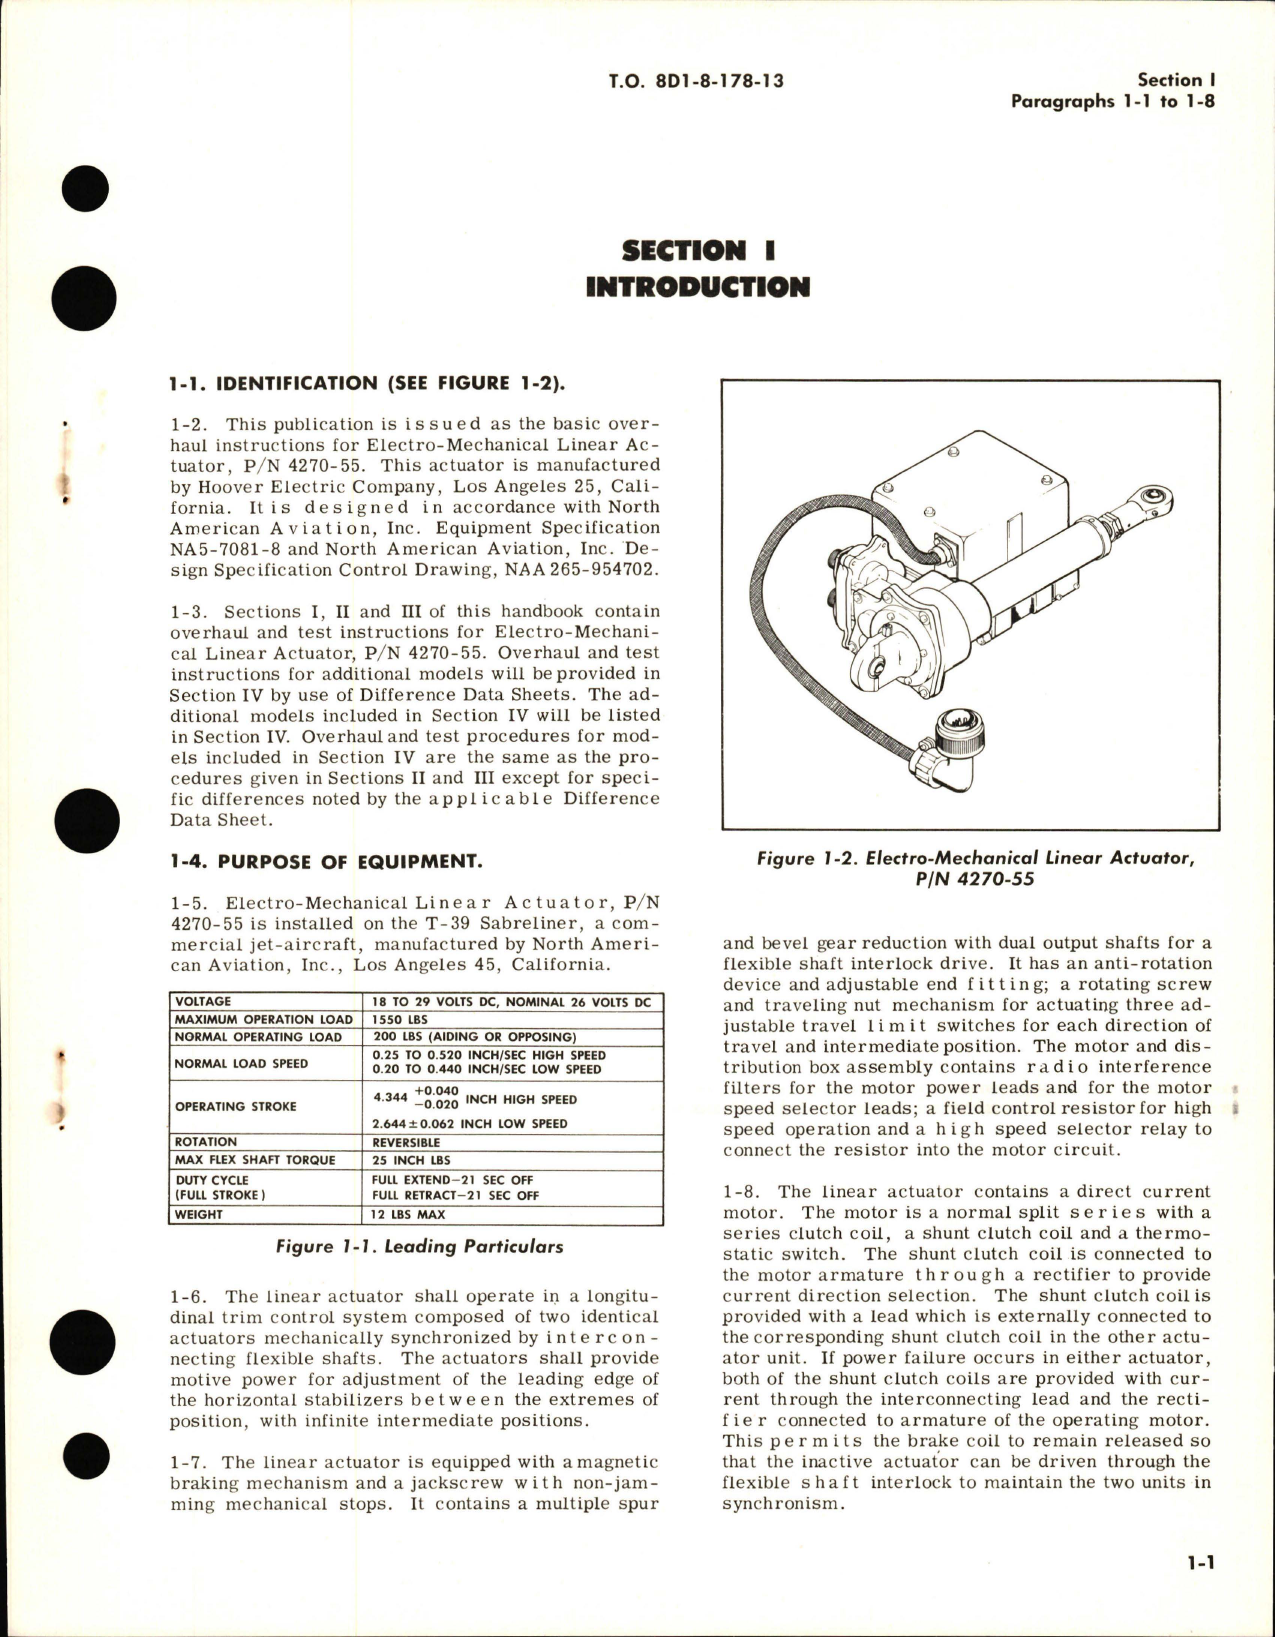 Sample page 5 from AirCorps Library document: Overhaul for Electro-Mechanical Linear Actuator Part 4270-55